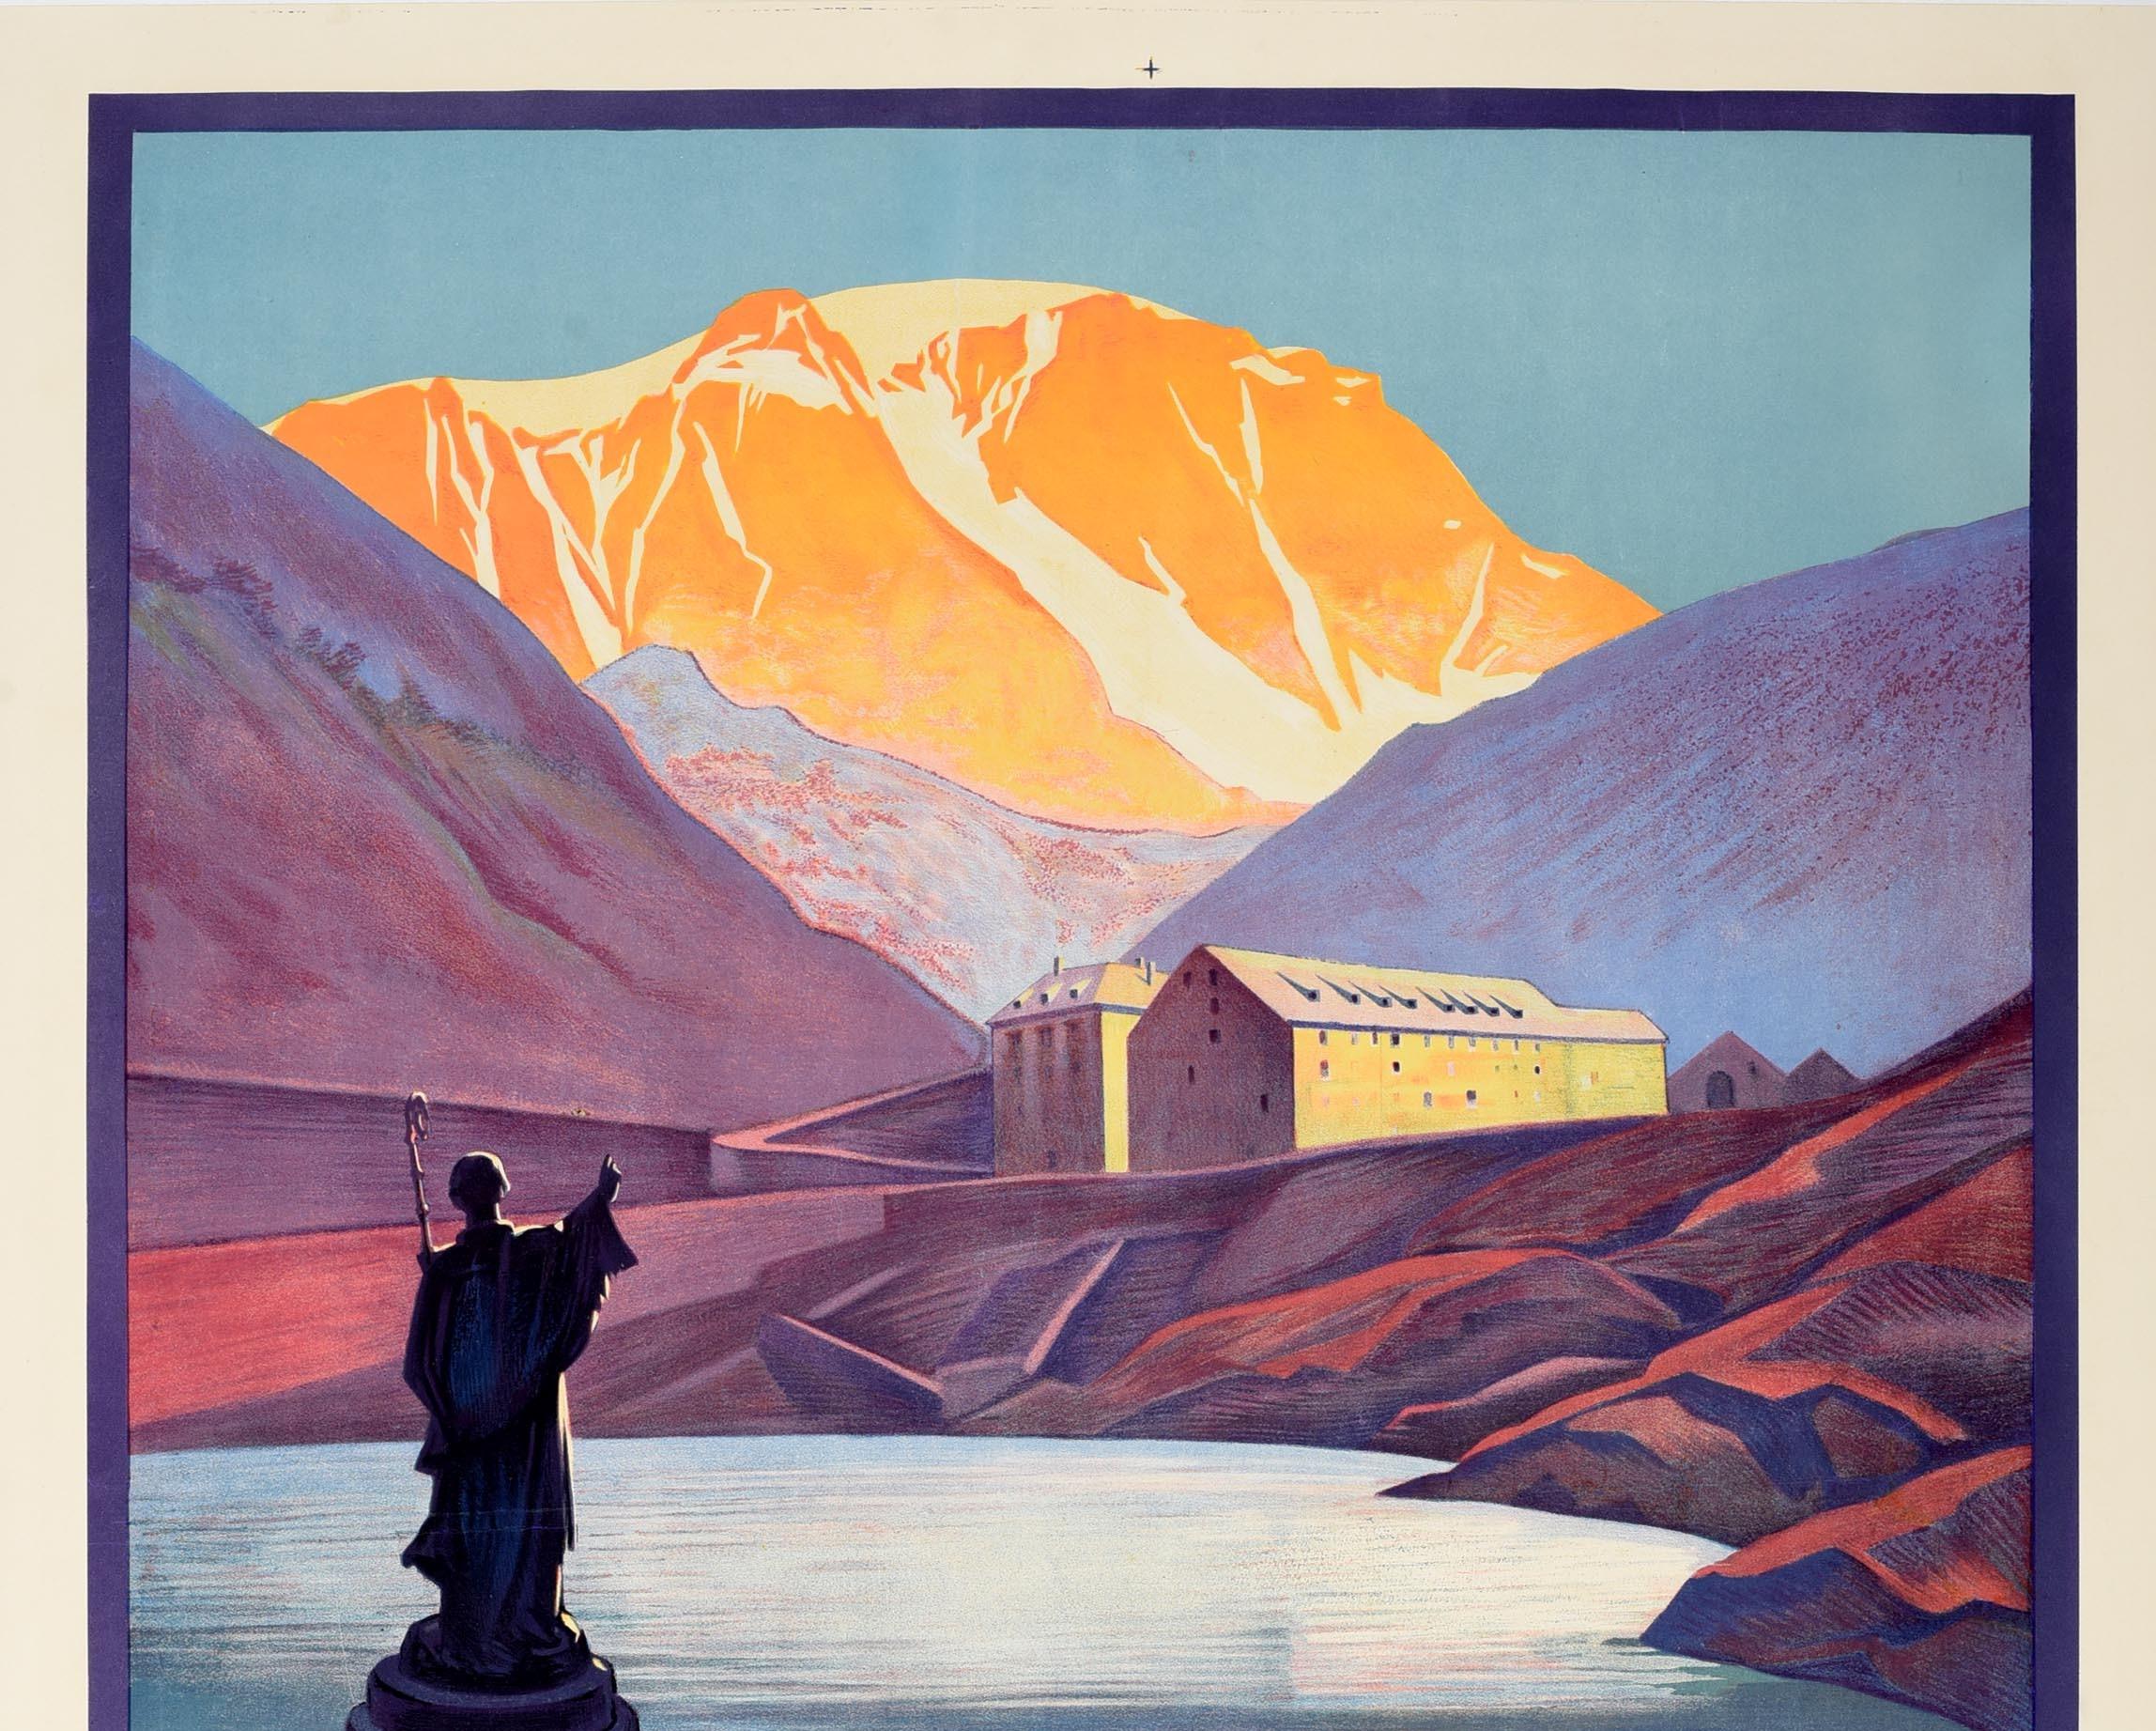 Original vintage PLM Paris Lyon Mediterranee railway travel poster for the historic Col Du Grand St Bernard / Great St. Bernard Pass lying between Mont Blanc and Monte Rosa in the Alps connecting Martigny in Valais Switzerland with Aosta in Italy (a